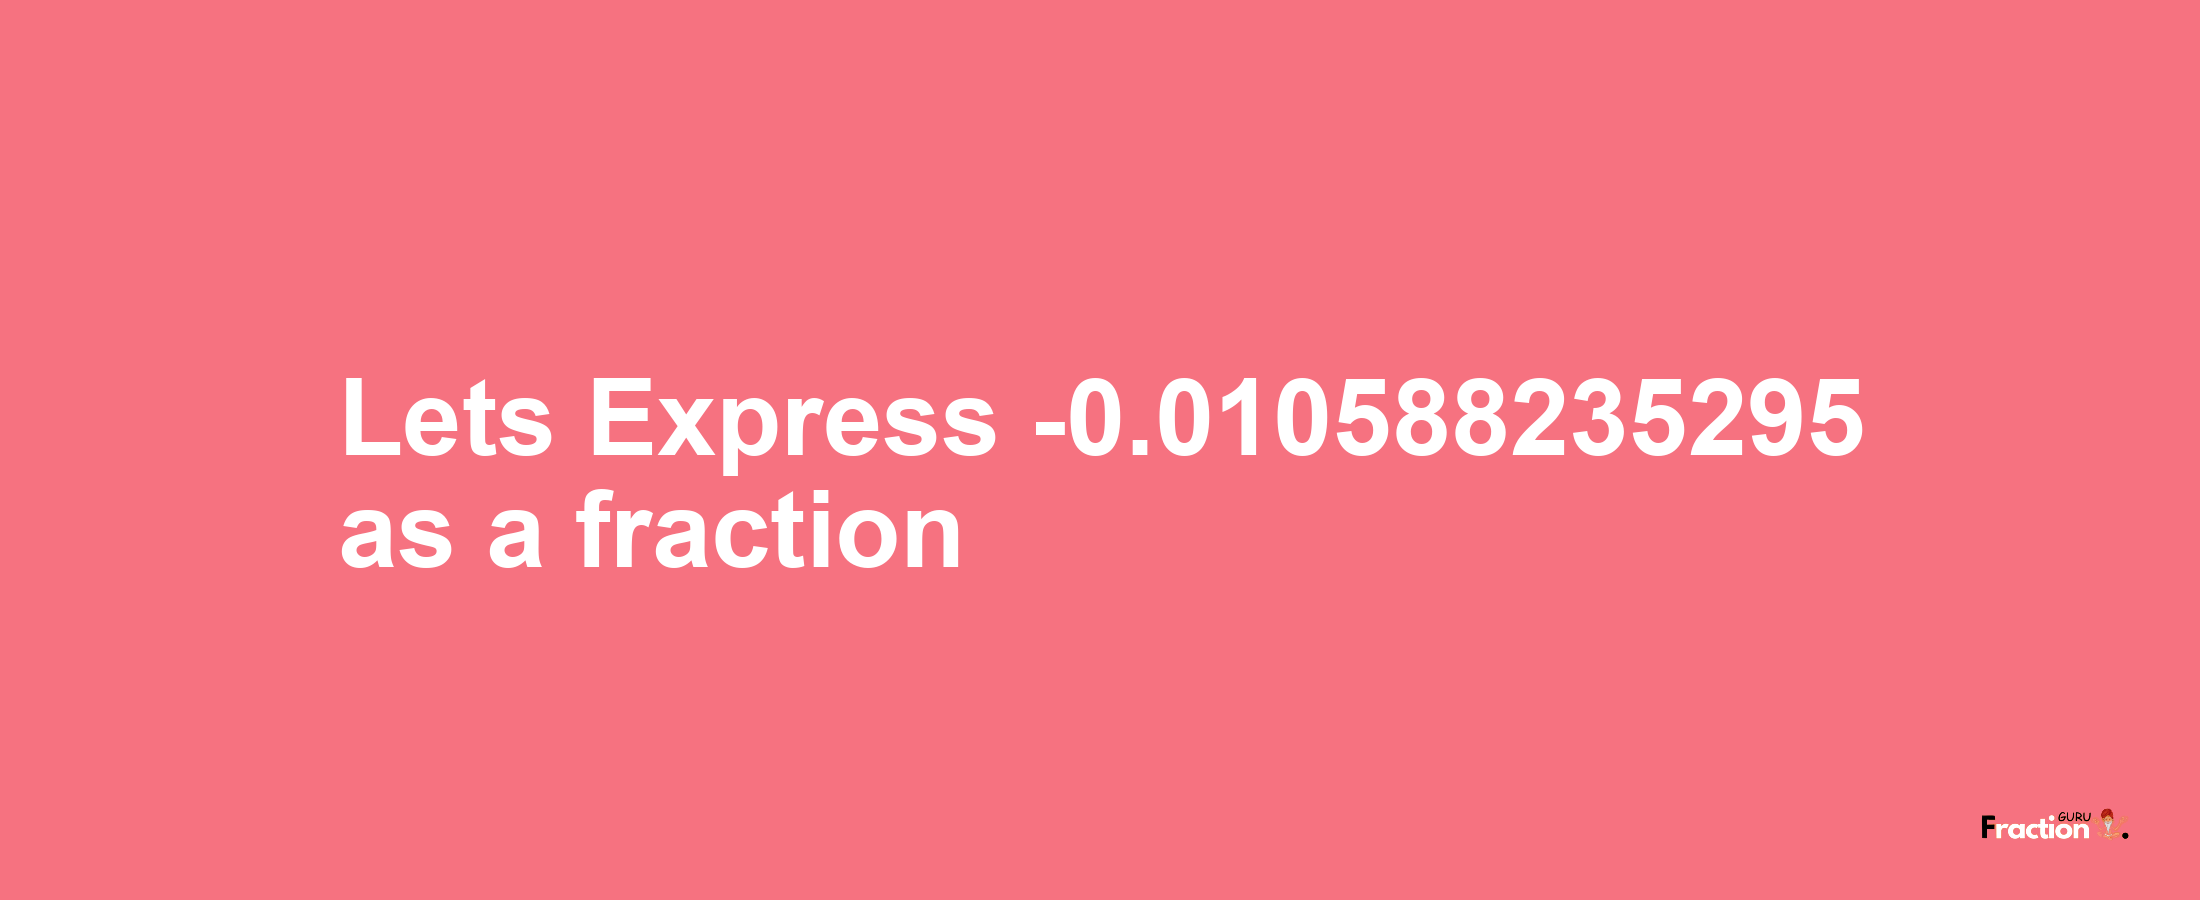 Lets Express -0.010588235295 as afraction